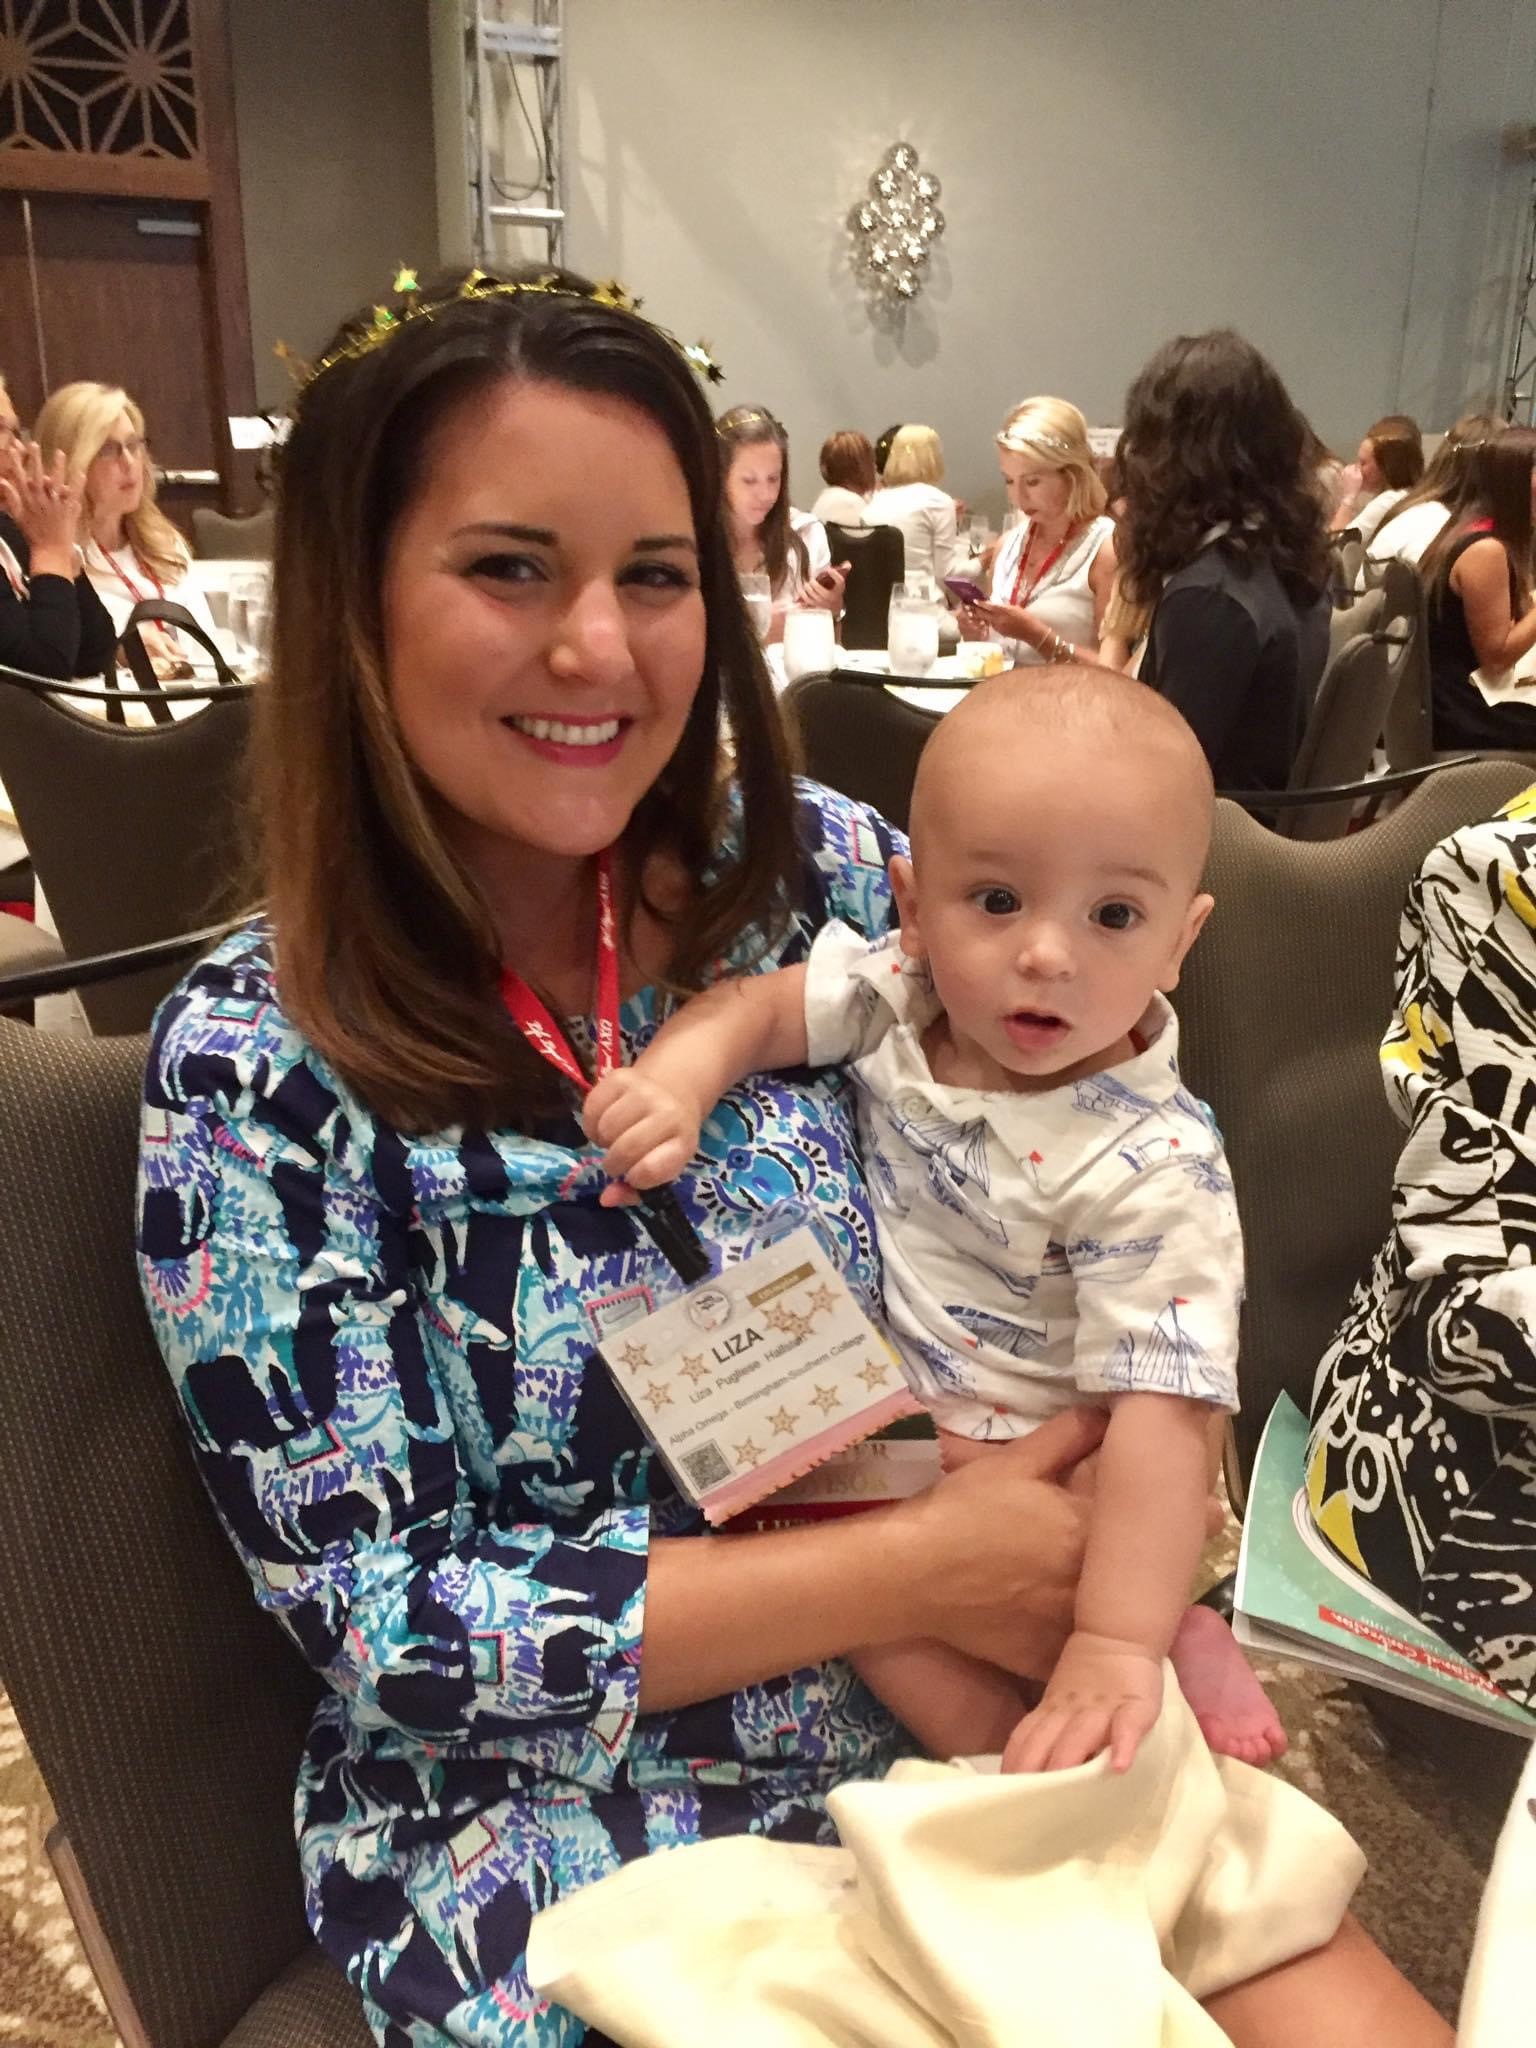 Liza’s son Asher has also had a blast at convention!